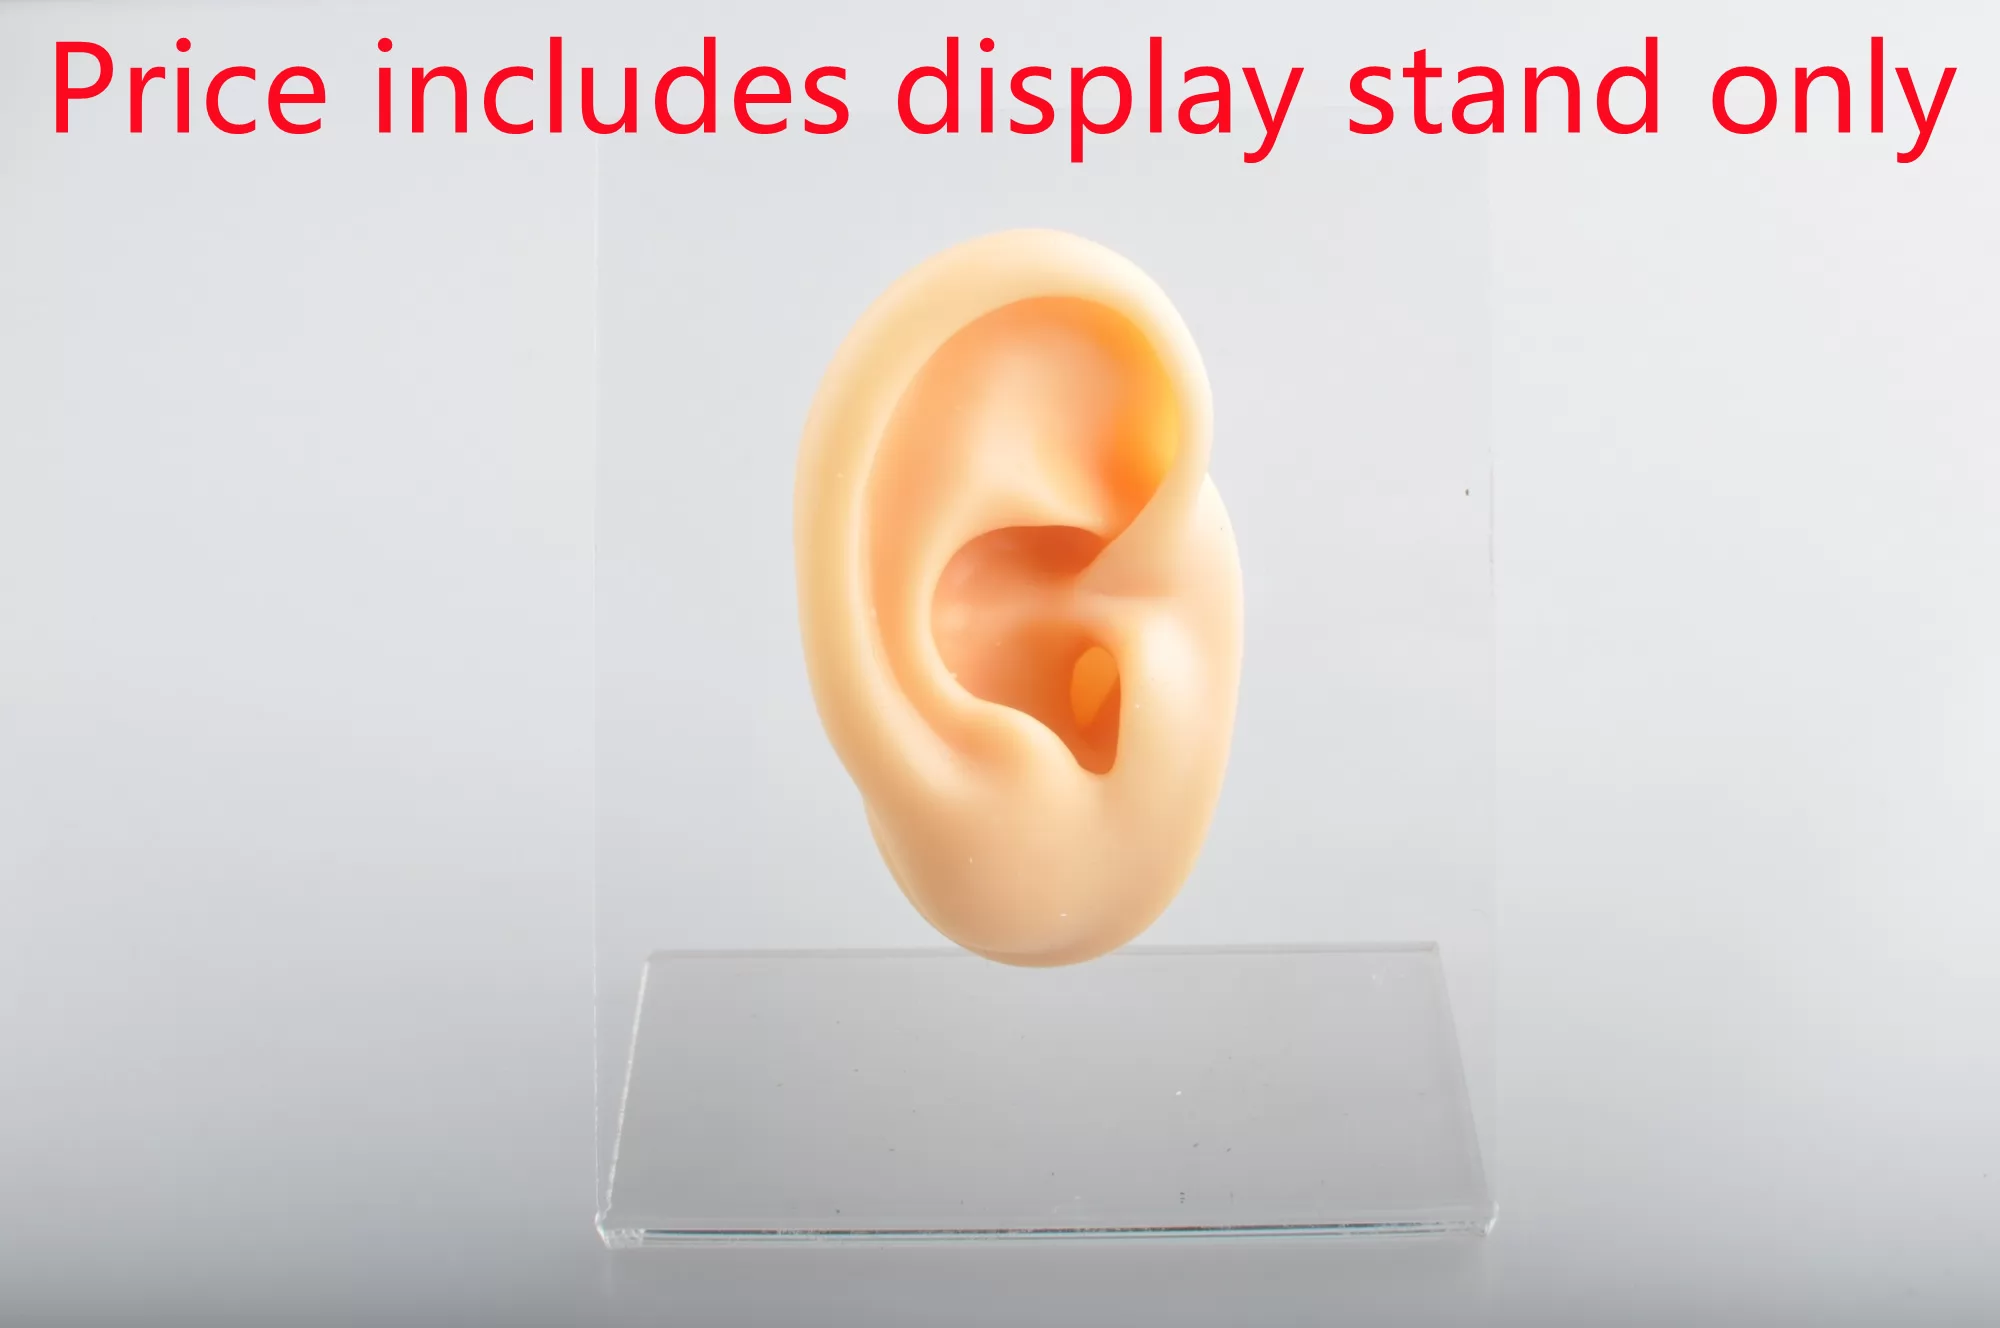 Nine Safe Piercing Silicone Organ Display Stand Oval Hole Not inclued Ear Silicone Fake Organ DIS-6